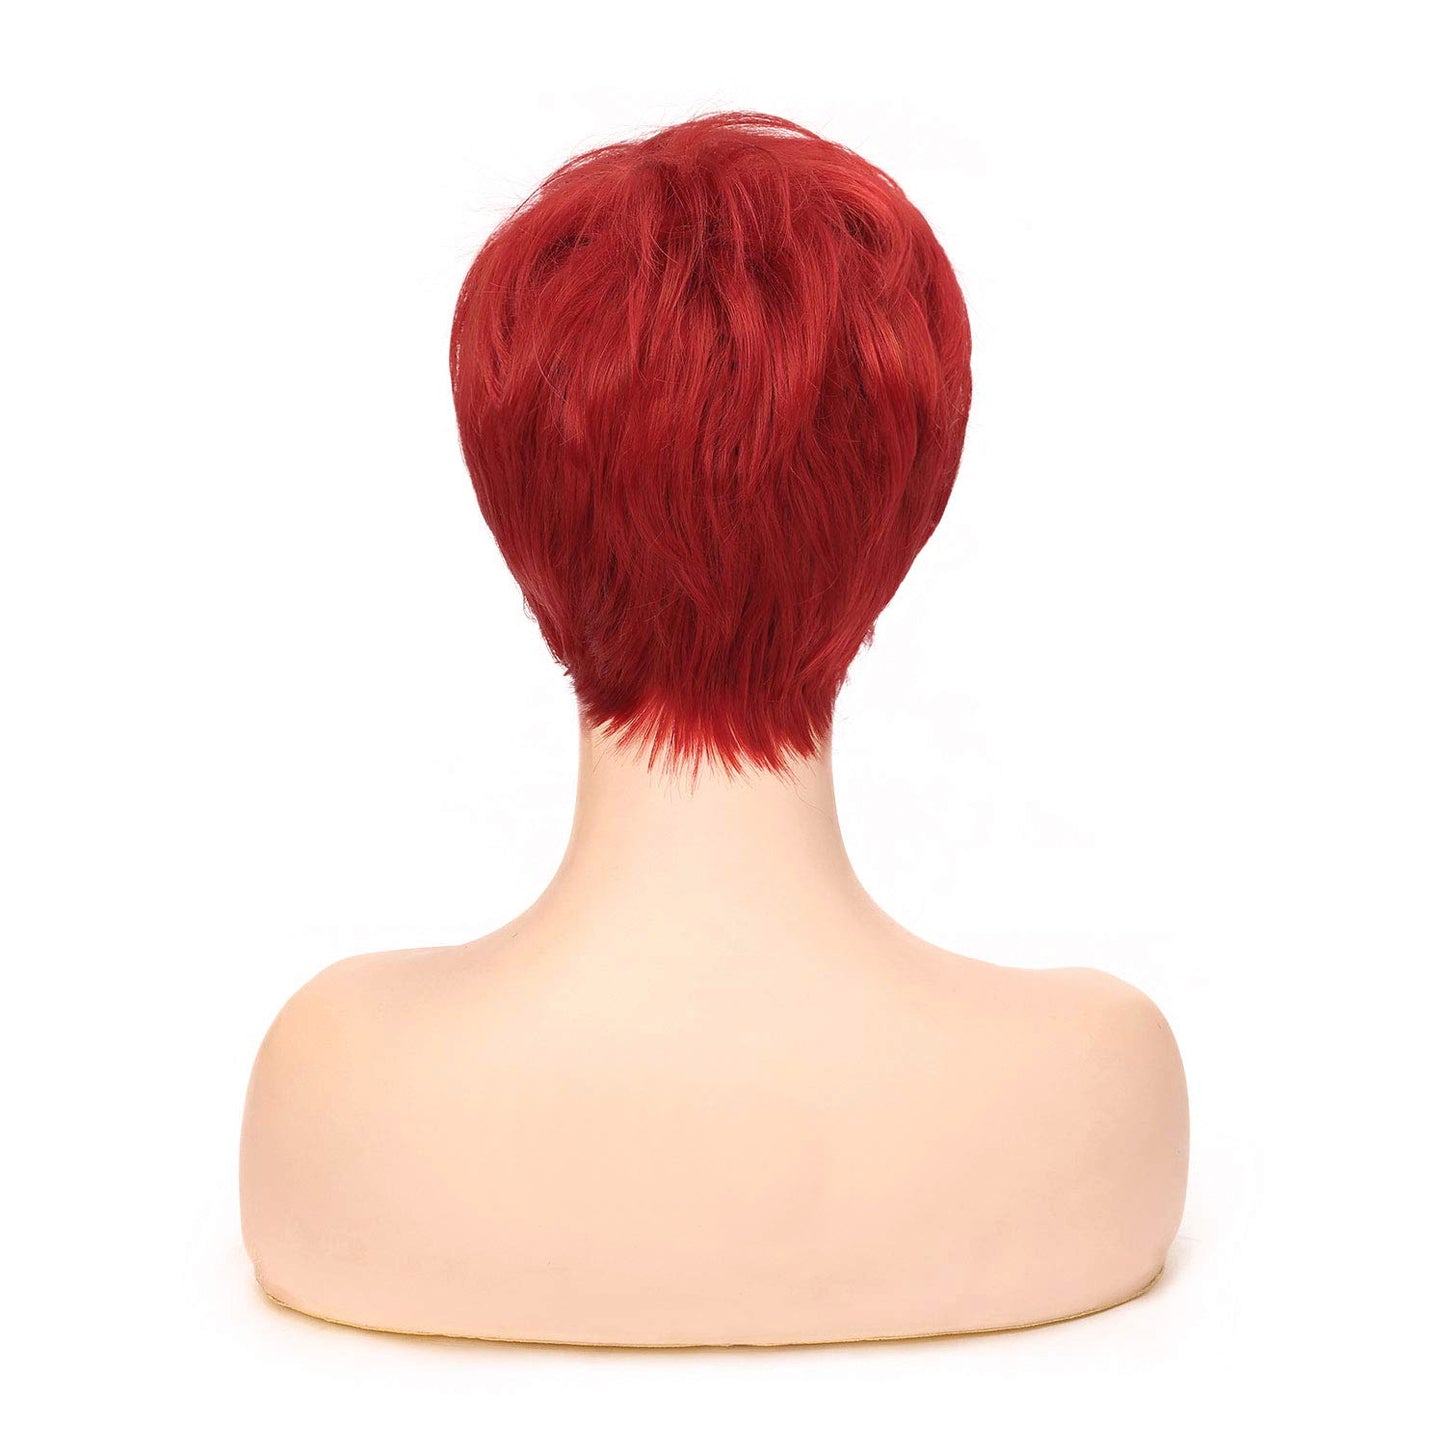 Short Pixie Cut Red Hair Wigs for Women